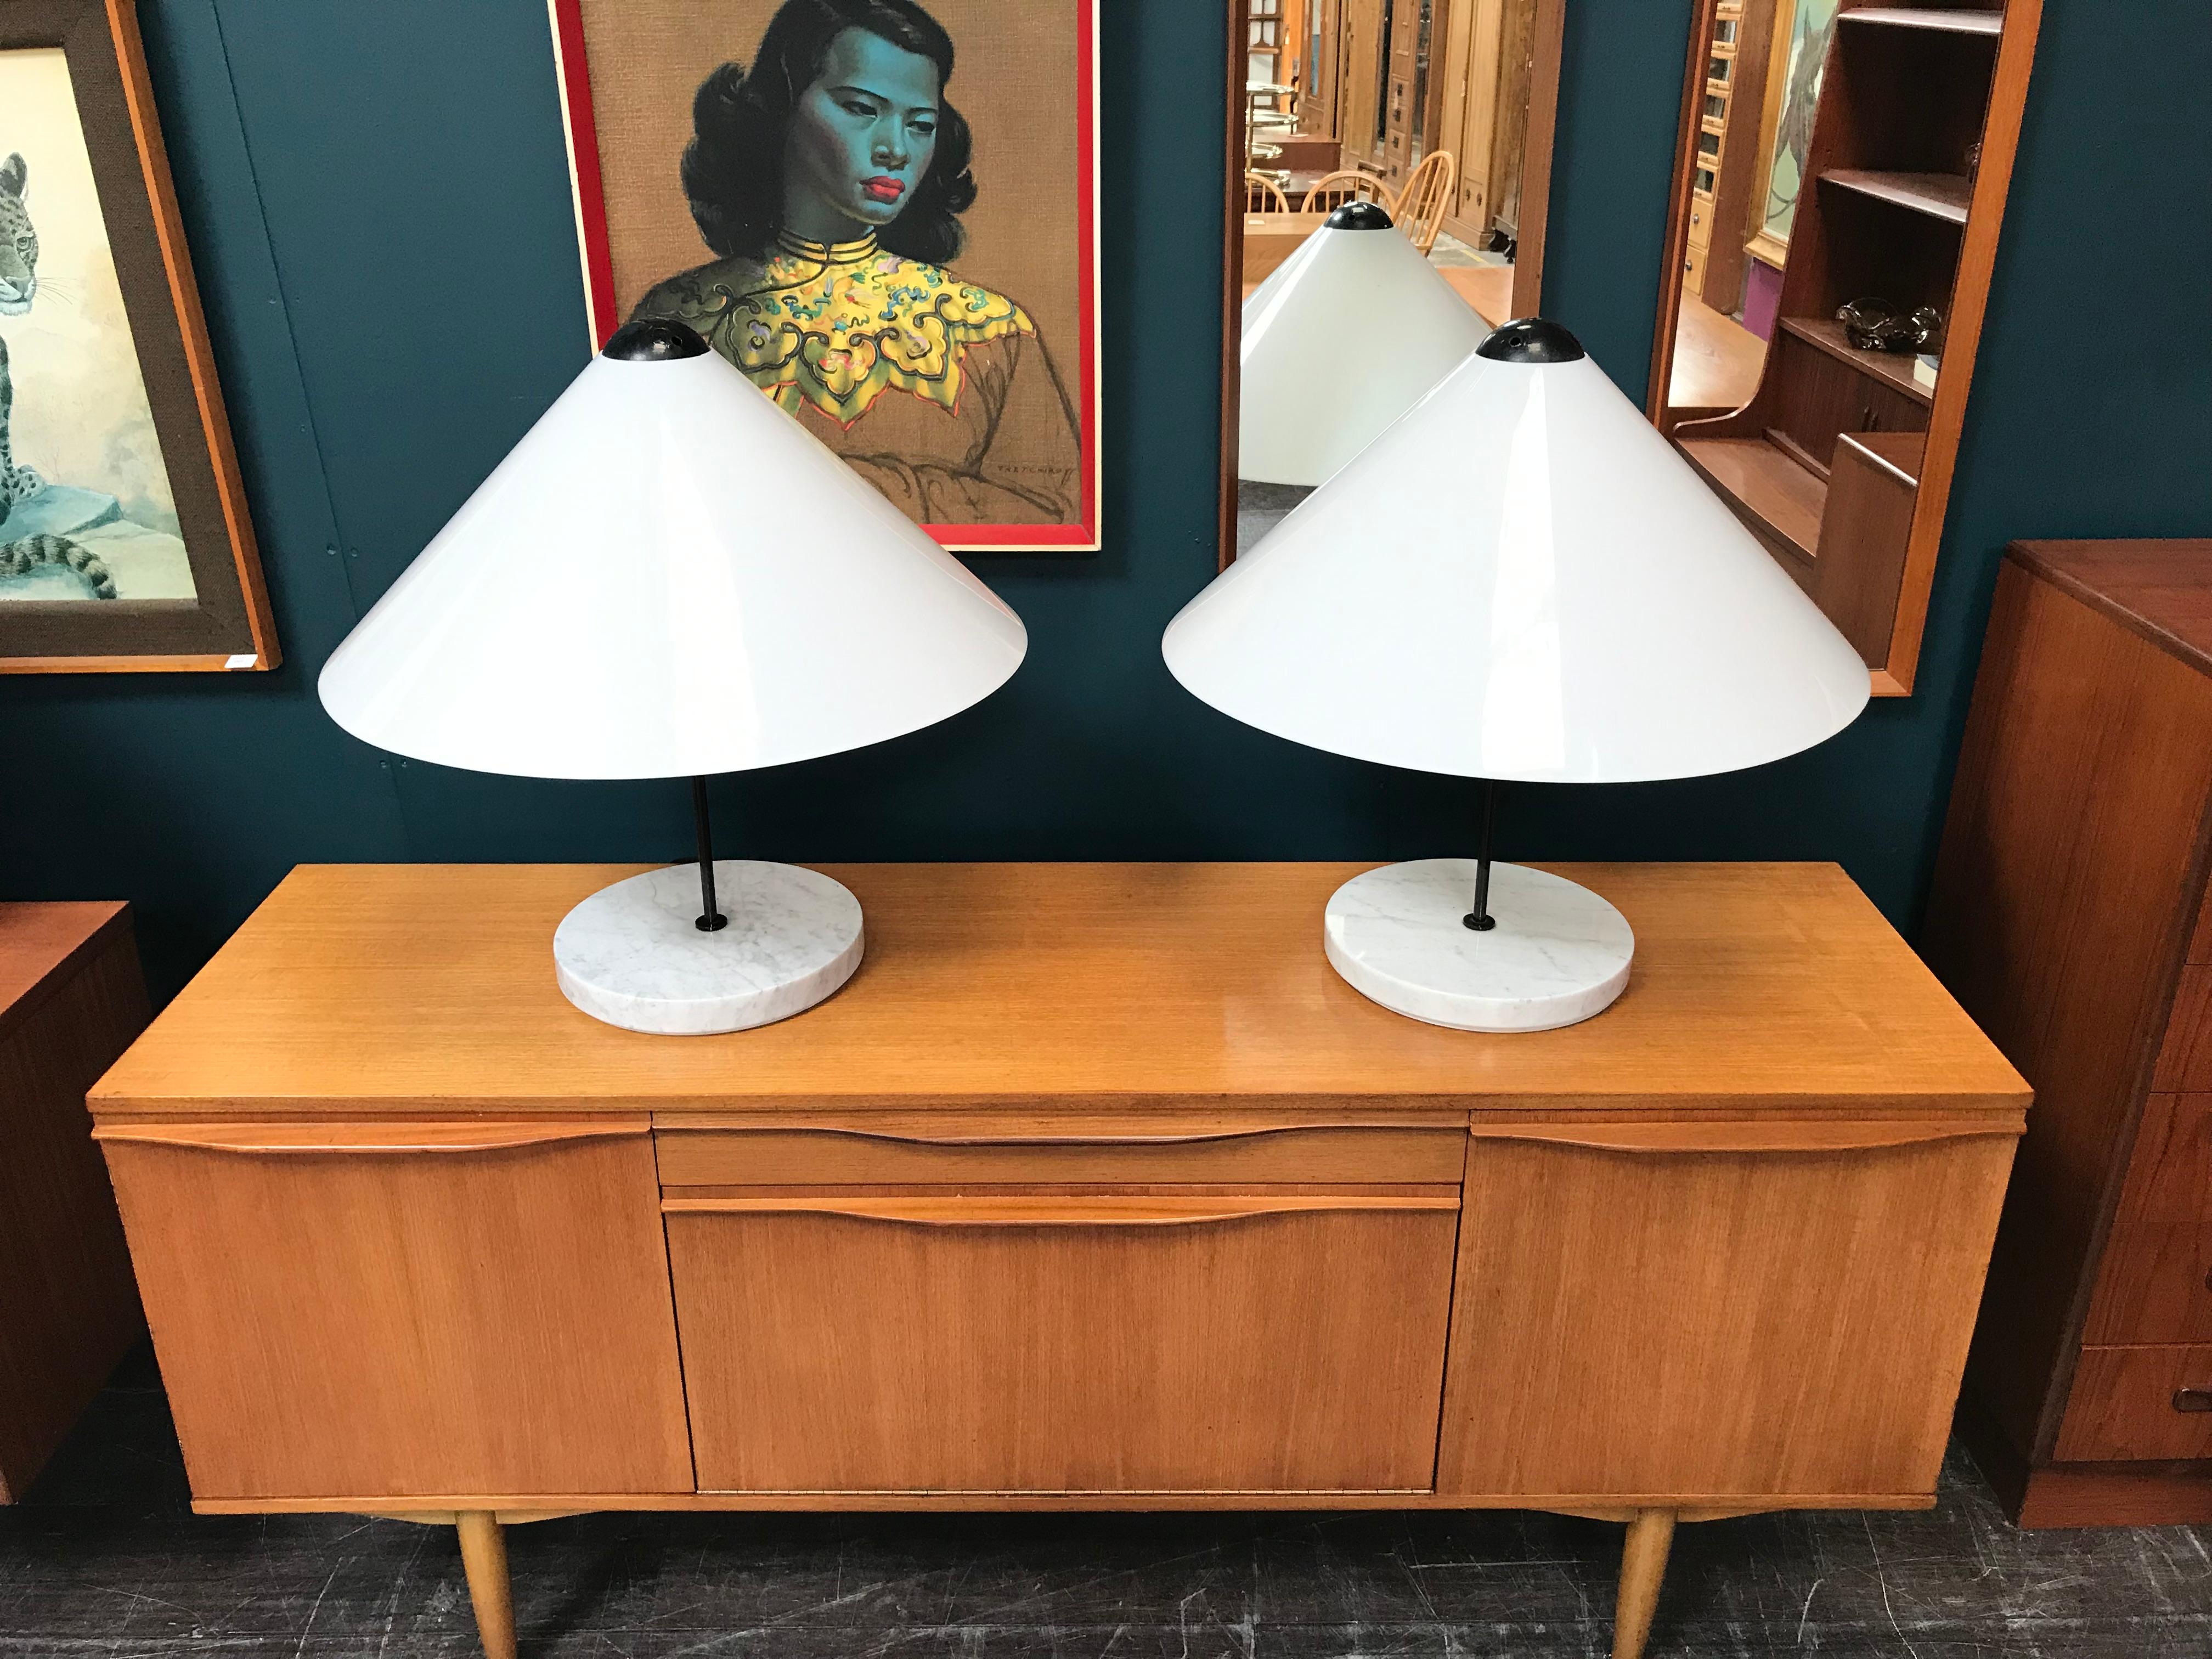 Fabulous table lamps with Italian marble bases and plastic shade. These table lamps were designed by the legendary Italian designer Vico Magestretti and manufactured in the 1970s. If you’ve not come across these before, note the ‘oversized’